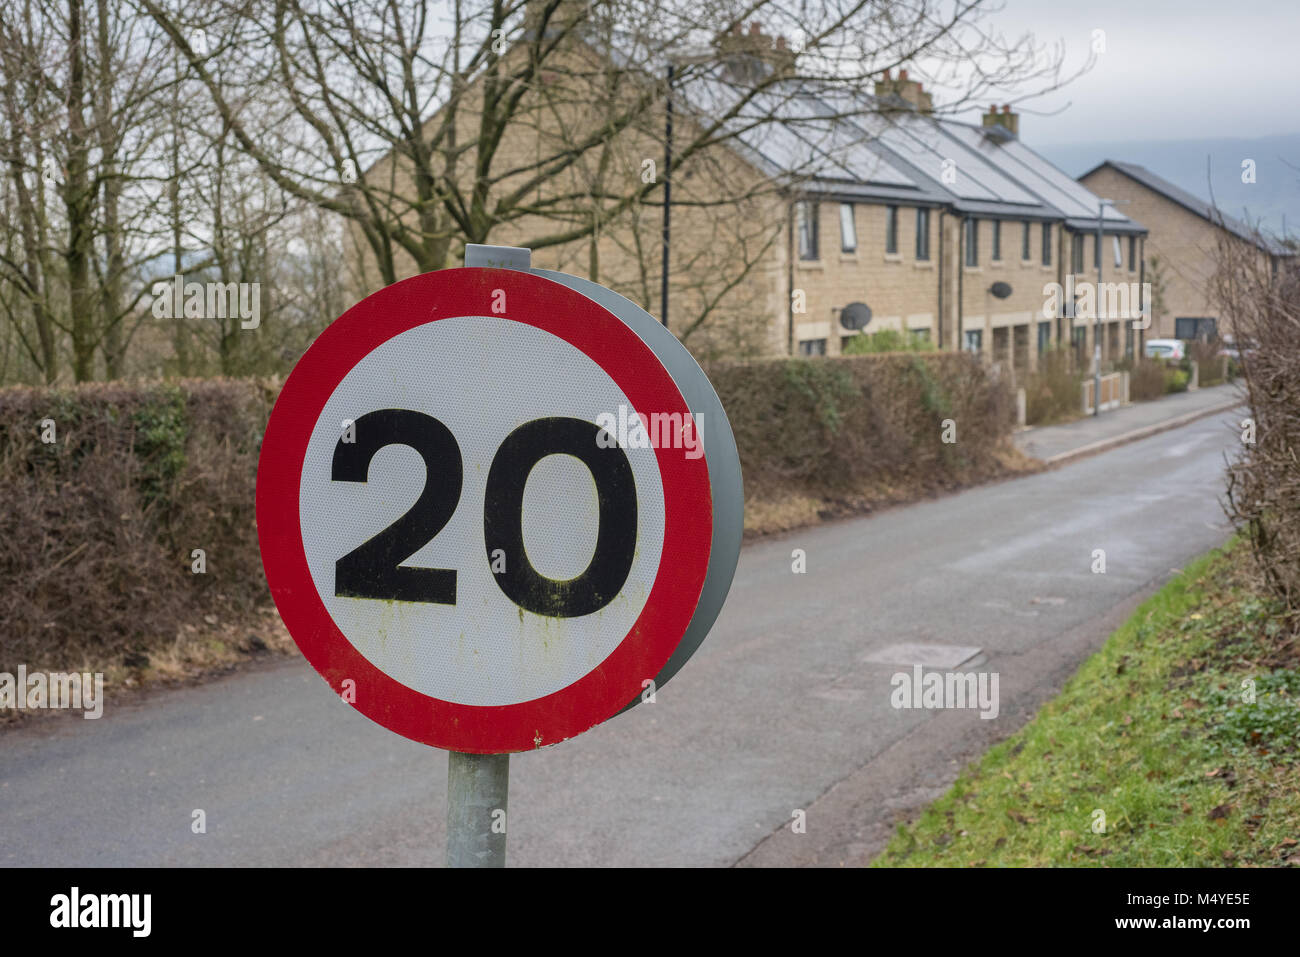 A 20 mph speed limit sign in a village, Chipping, Preston, Lancashire. Stock Photo